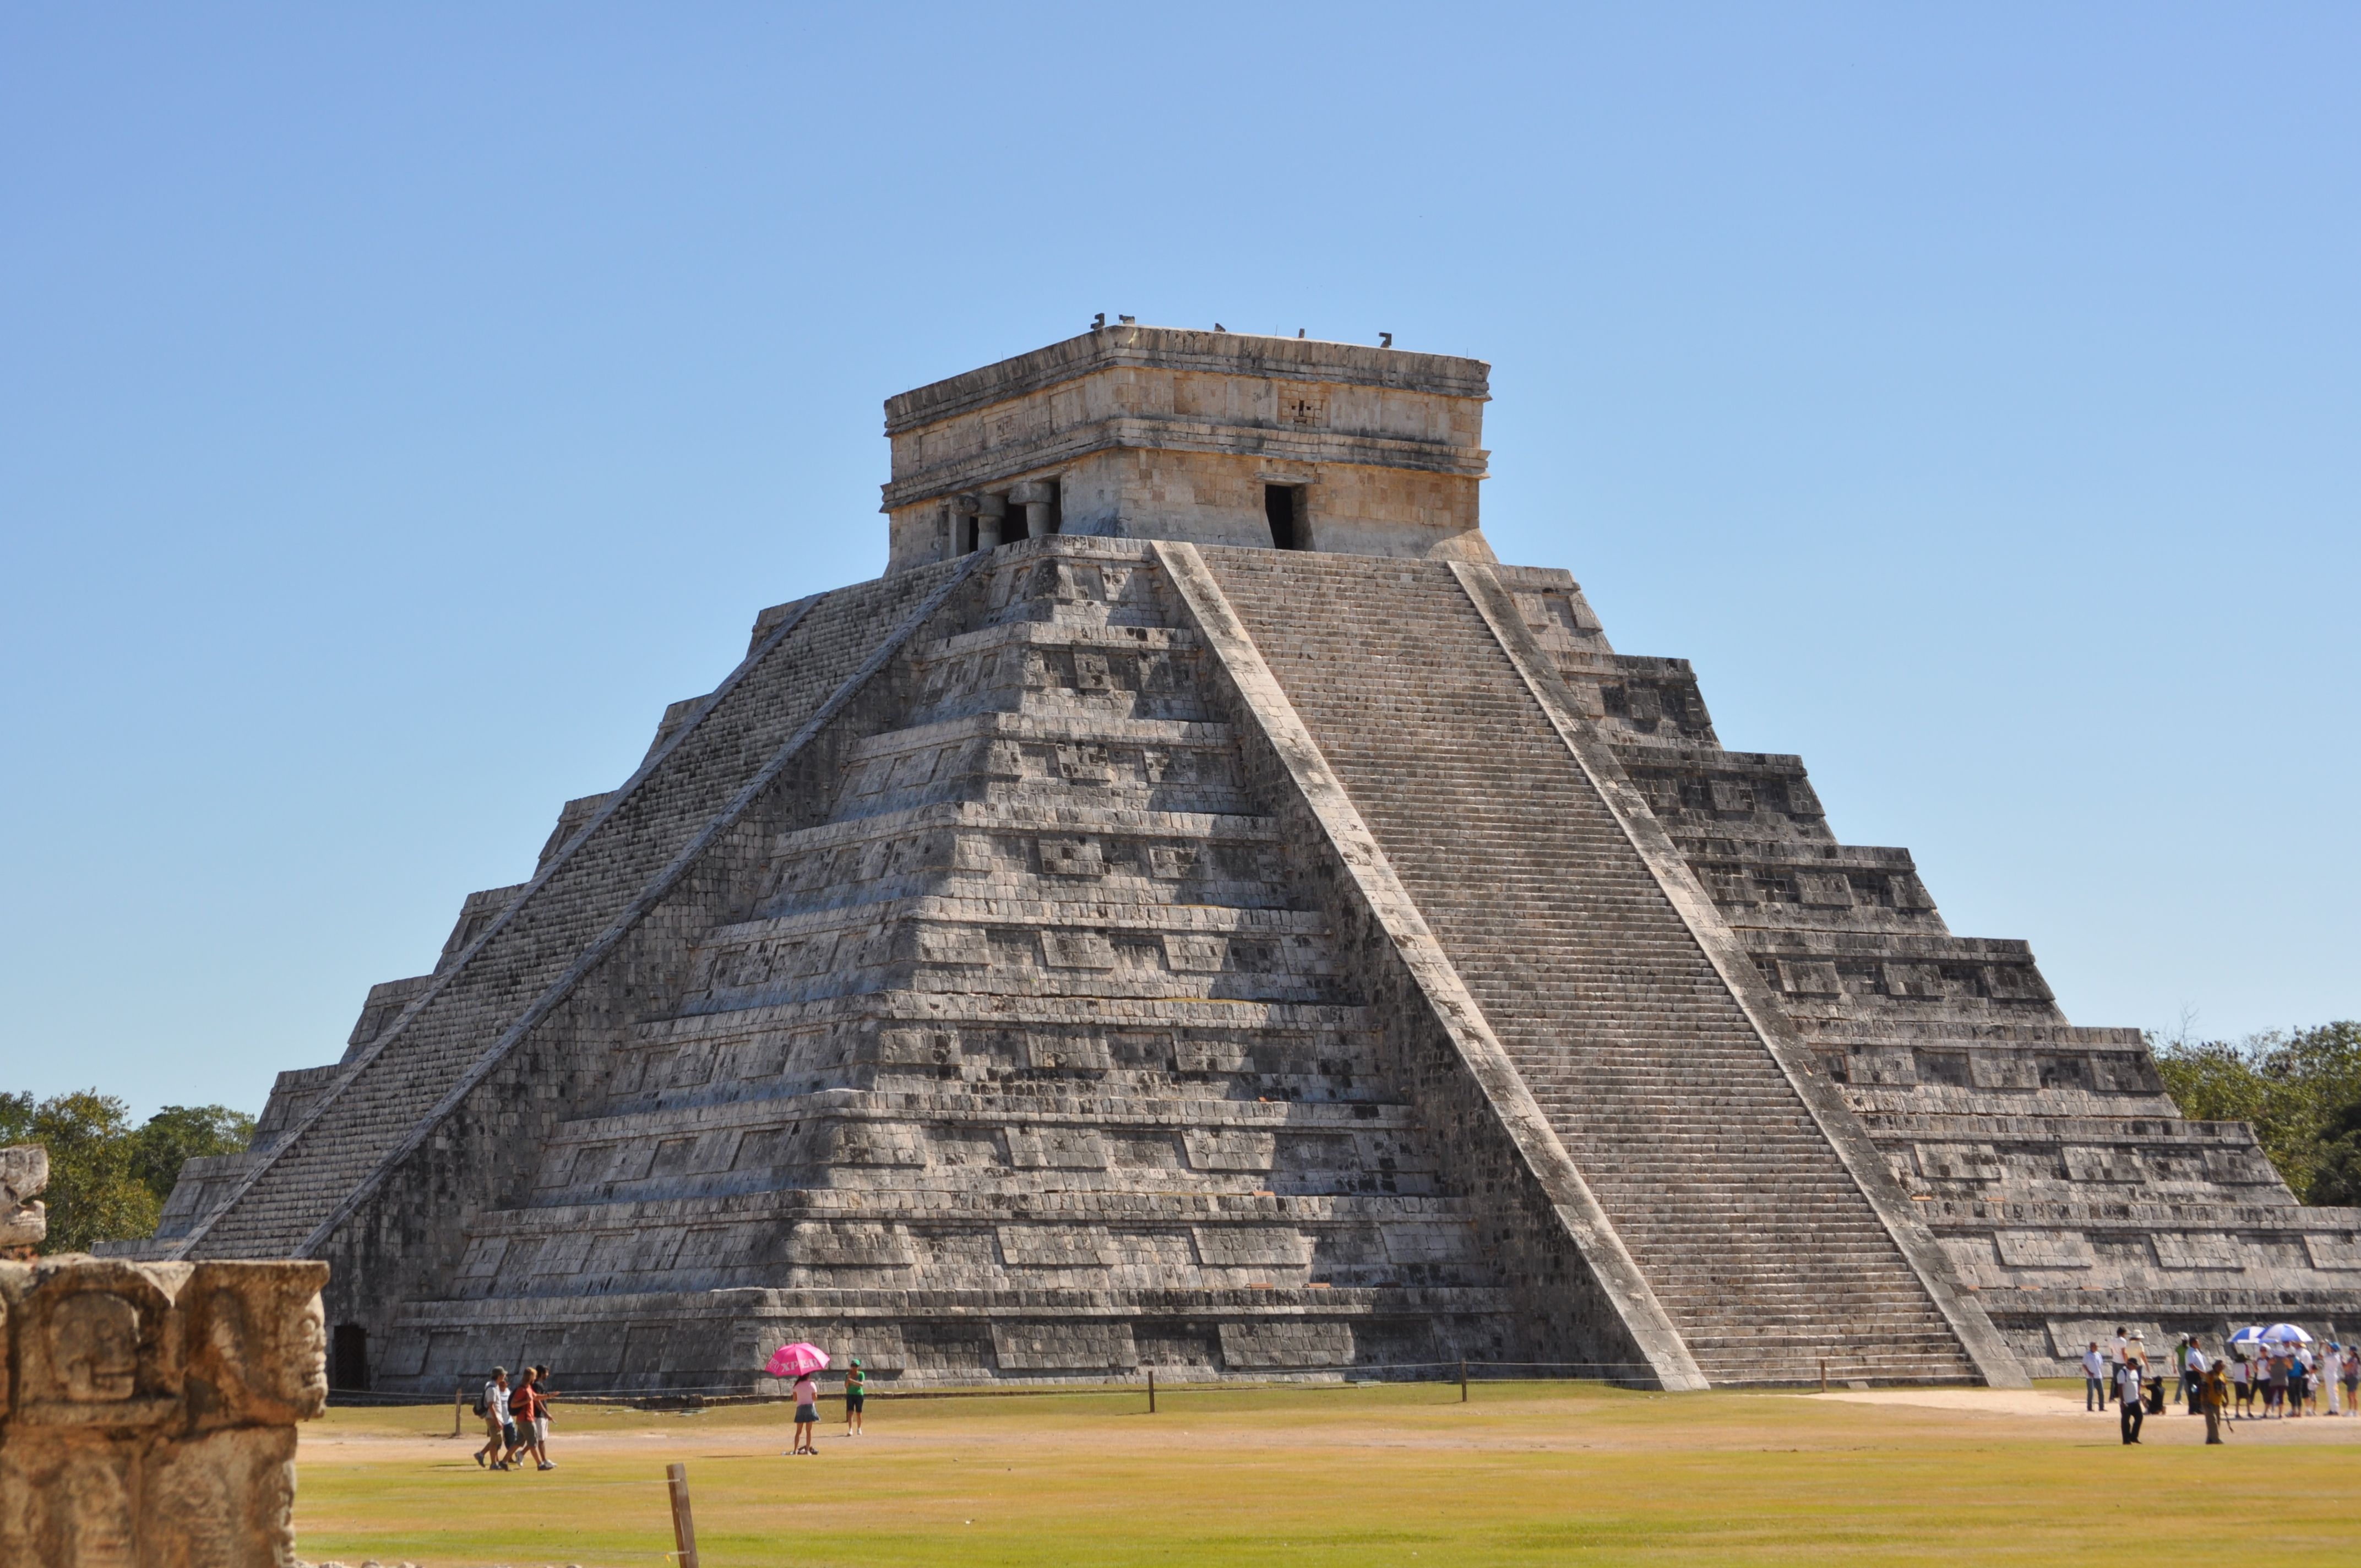 Krystal International Vacation Club Cancun Shares Knowledge About the Mayan Culture in Mexico (4)